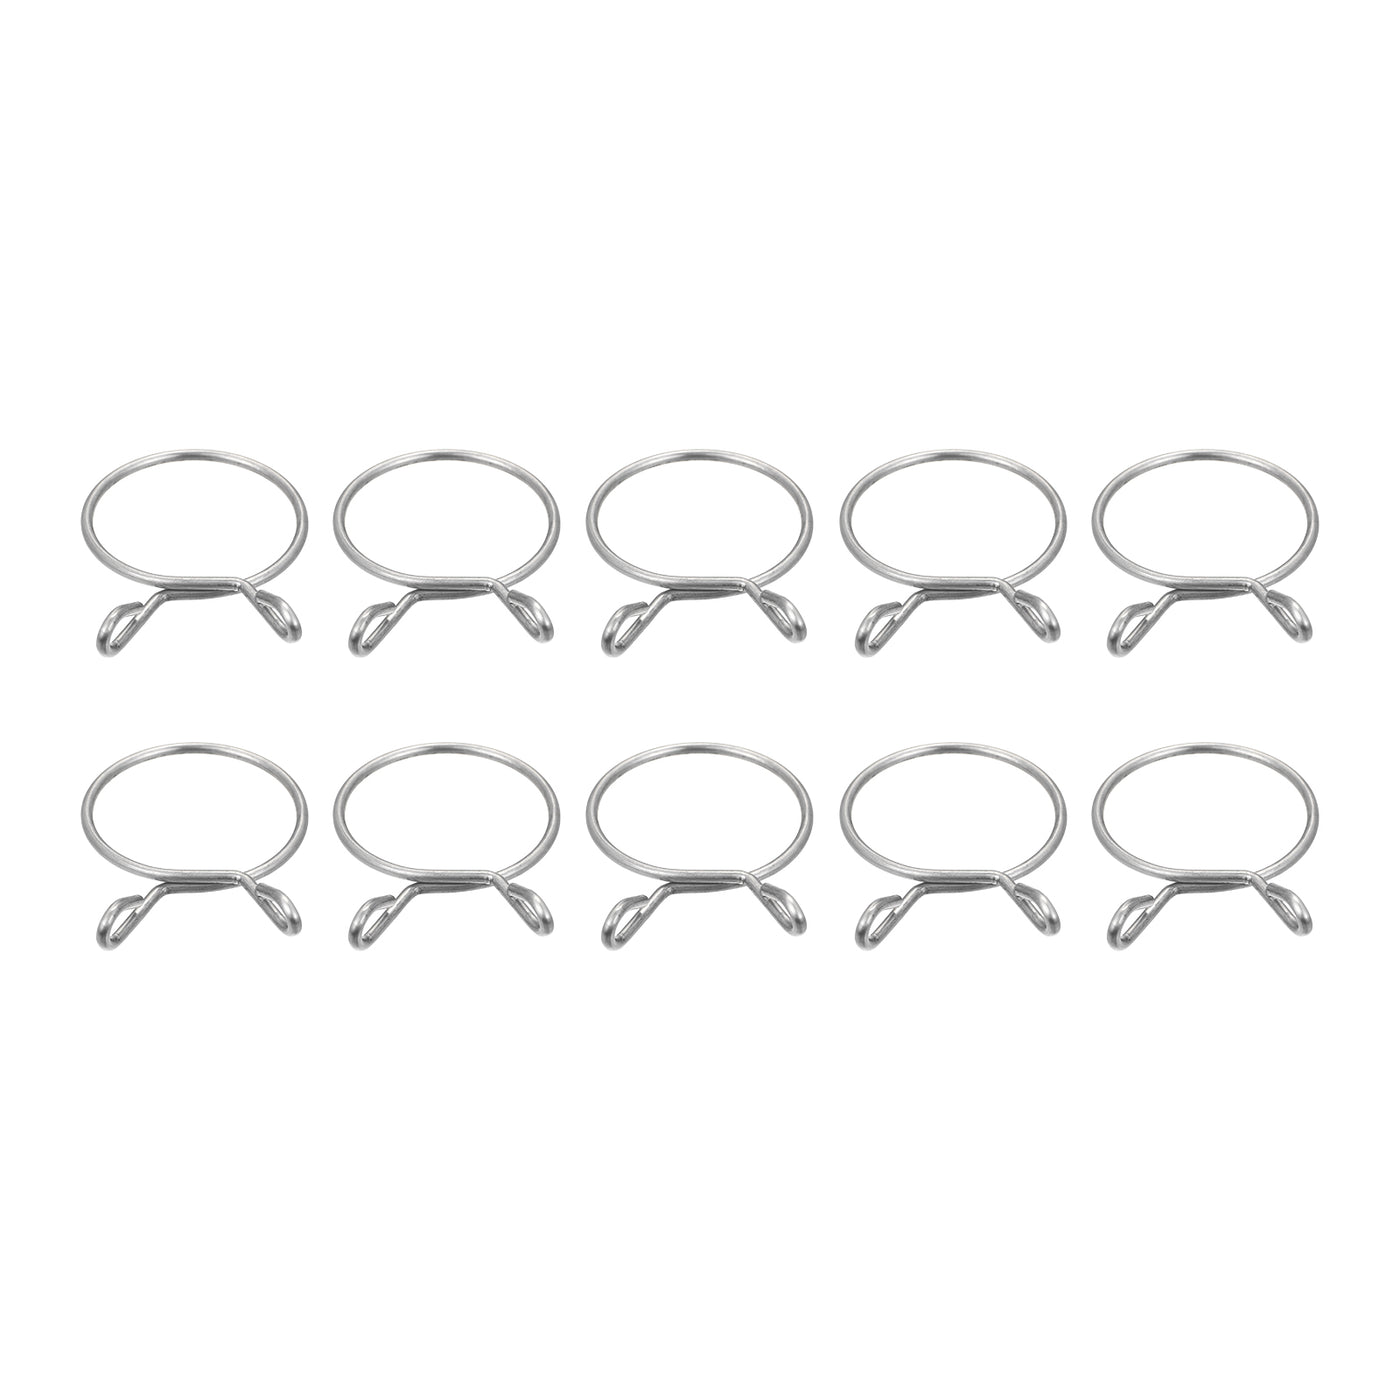 Uxcell Uxcell Fuel Line Hose Clips, 10pcs 29mm 304 Stainless Steel Tube Spring Clamps(Silver)